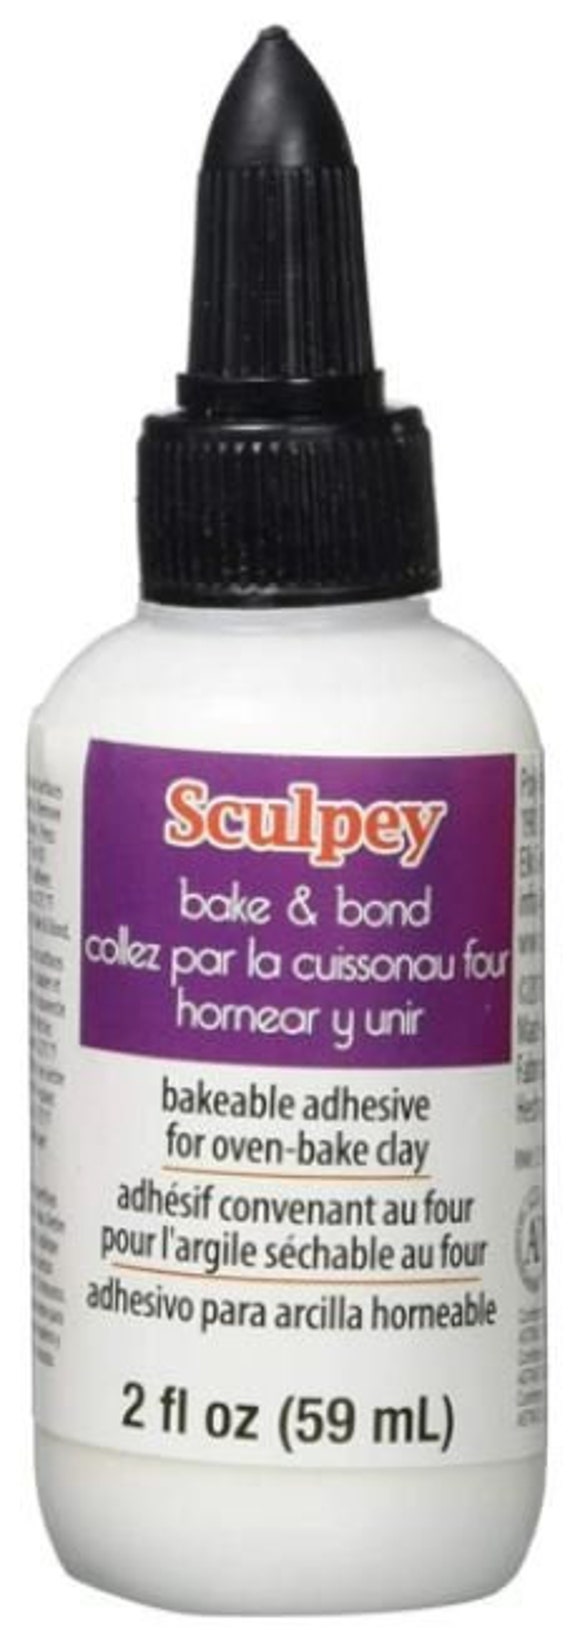 Sculpey Liquid Polymer Clay, Translucent, 59 Ml, Bakeable, Mixing and  Forming Medium for All Polymer Clay Crafts, Jewelry Making Medium 